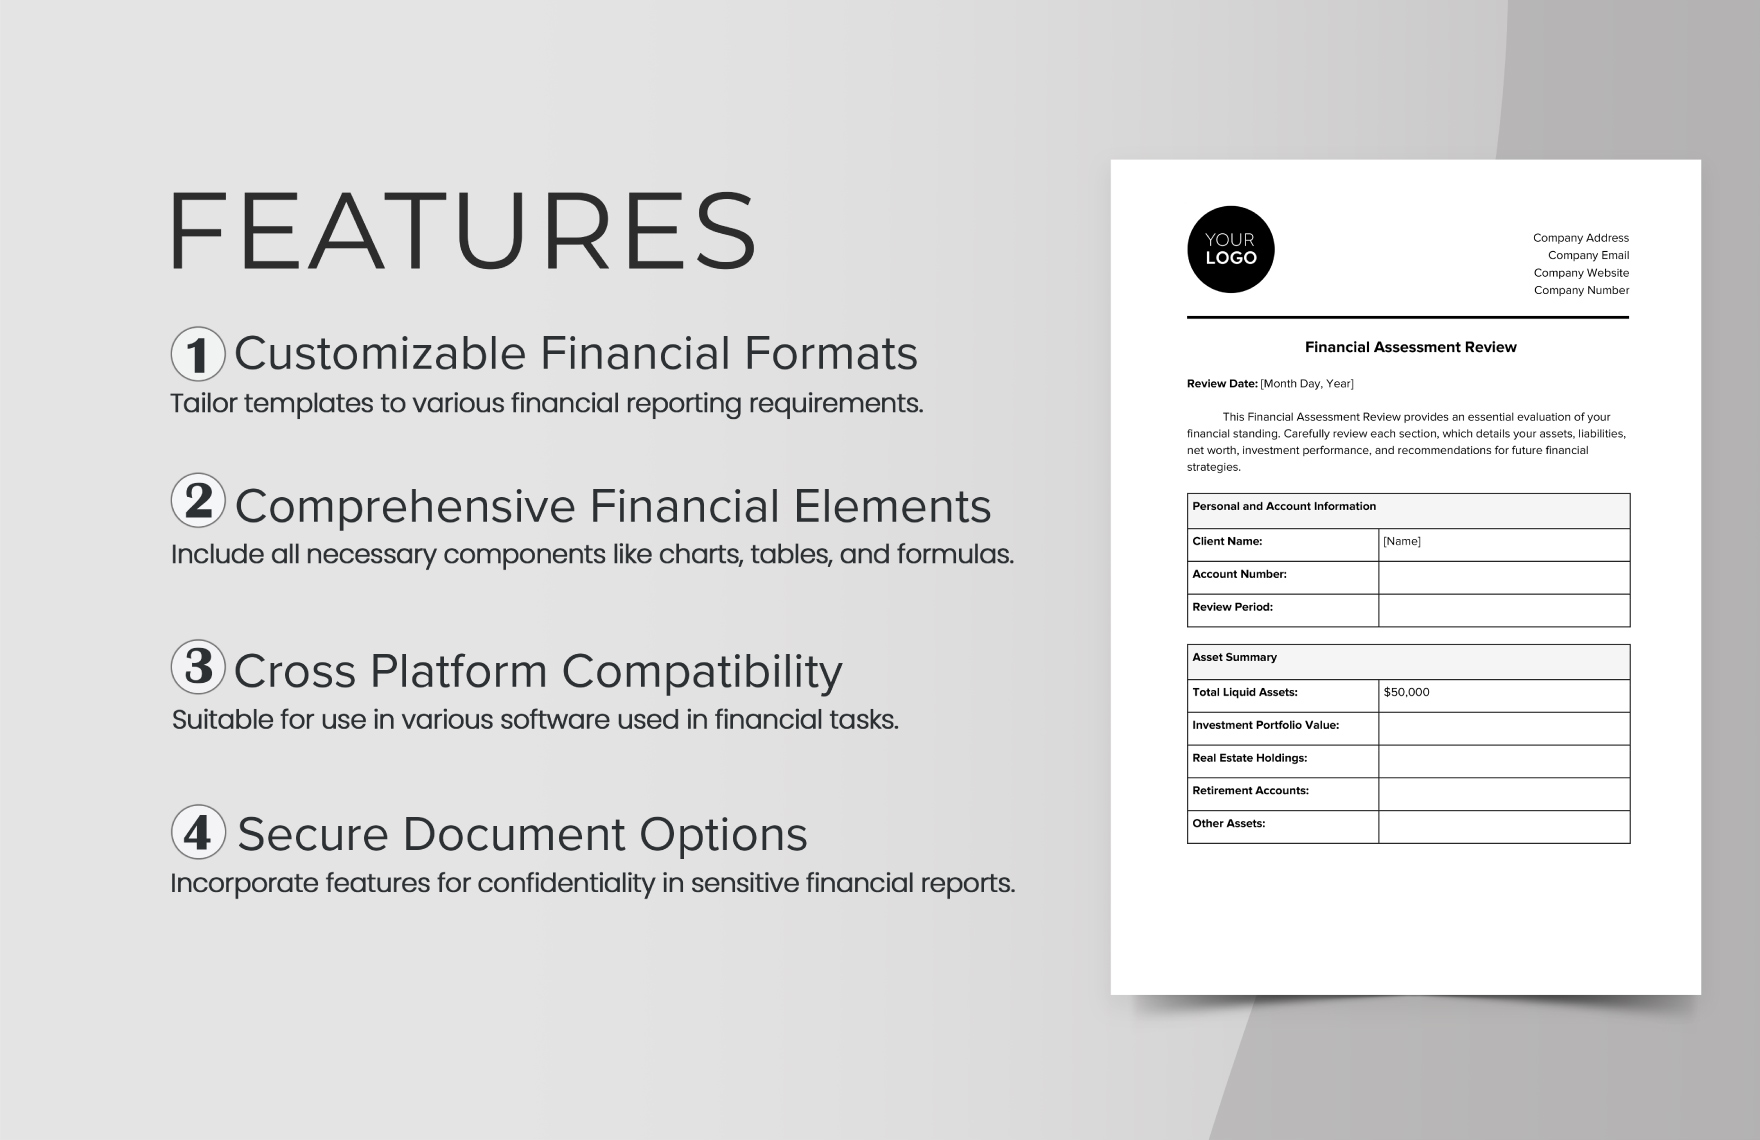 Financial Assessment Review Template